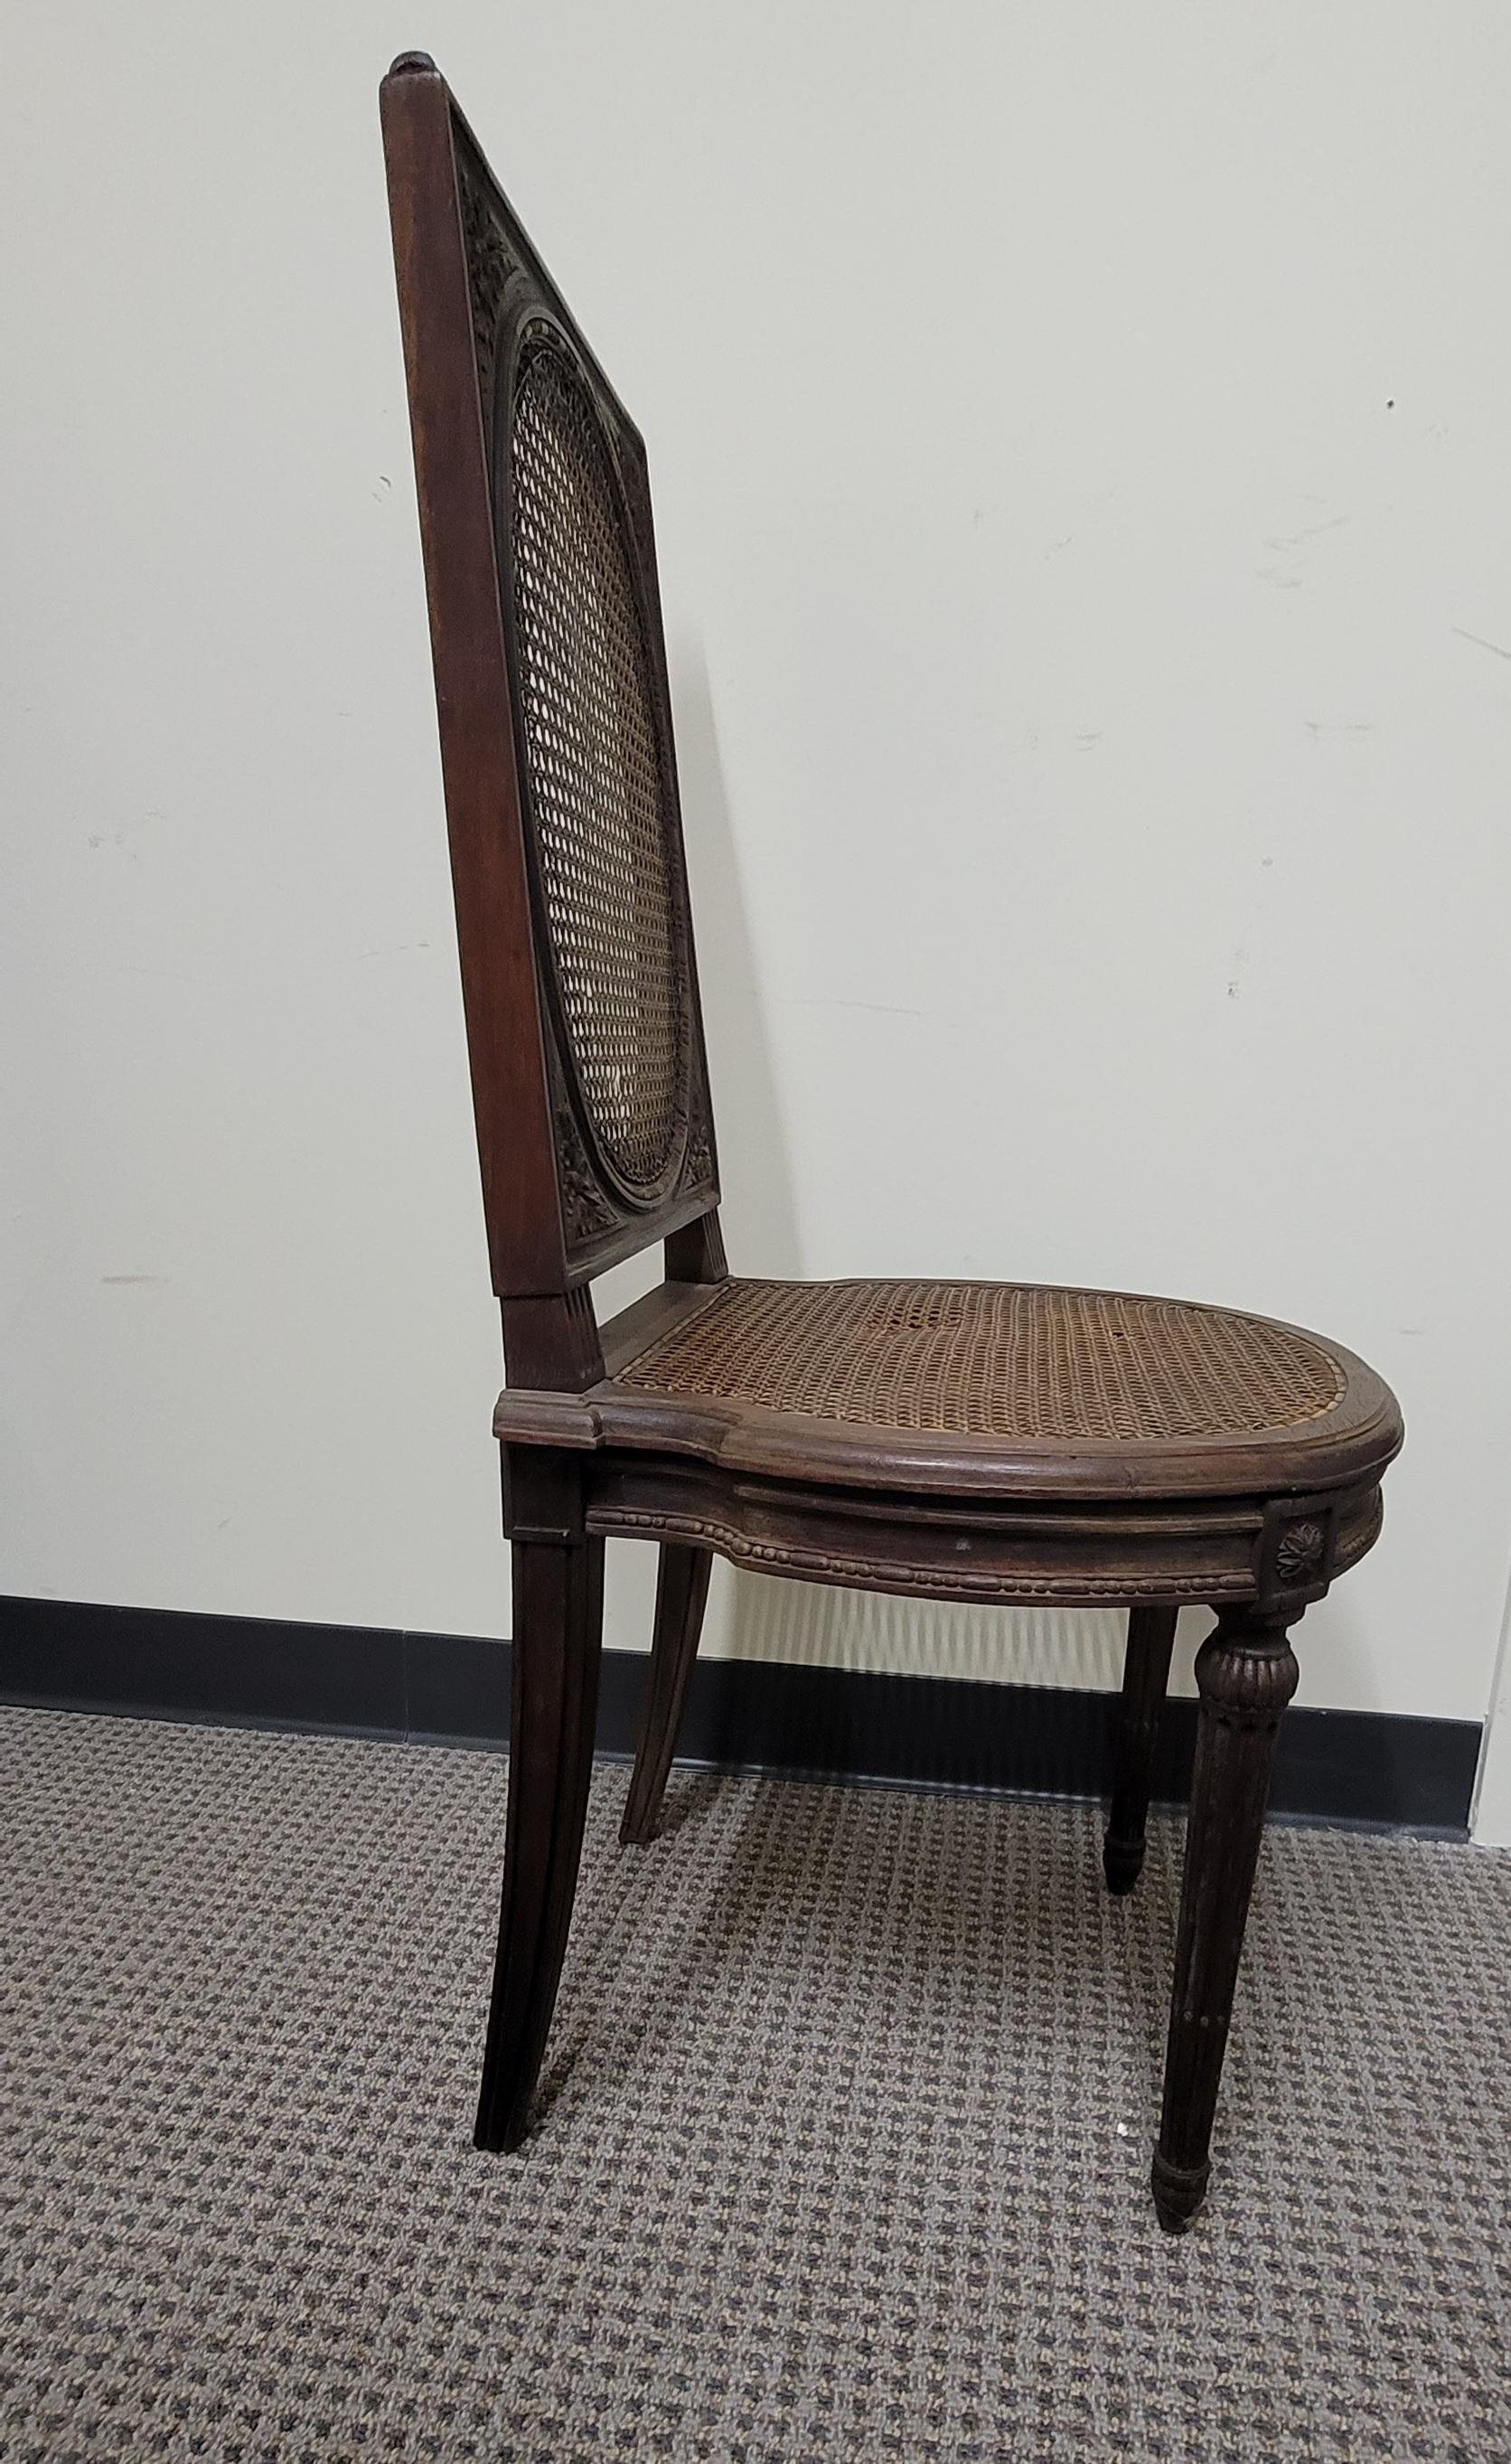 1860s French Fine Hand-Carved Walnut and Cane Side Chair In Good Condition For Sale In Germantown, MD